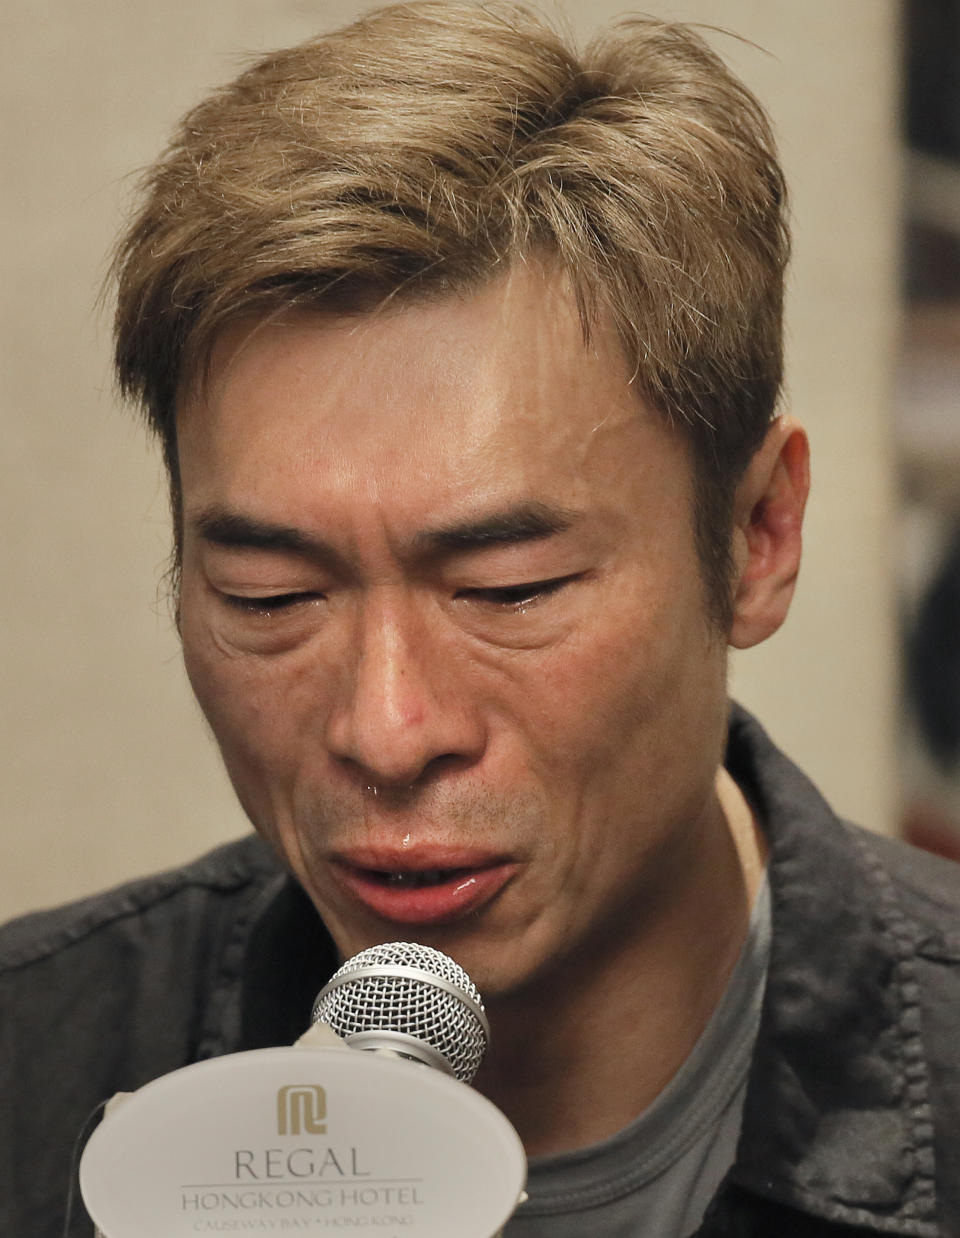 Hong Kong singer Andy Hui reacts at the press conference in Hong Kong, Tuesday, April 16, 2019. Hong Kong's Apple Daily newspaper published video that purported to show Andy Hui being intimate in a taxi with another Hong actress, decades younger than him, Jacqueline Wong. (AP Photo/Vincent Yu)